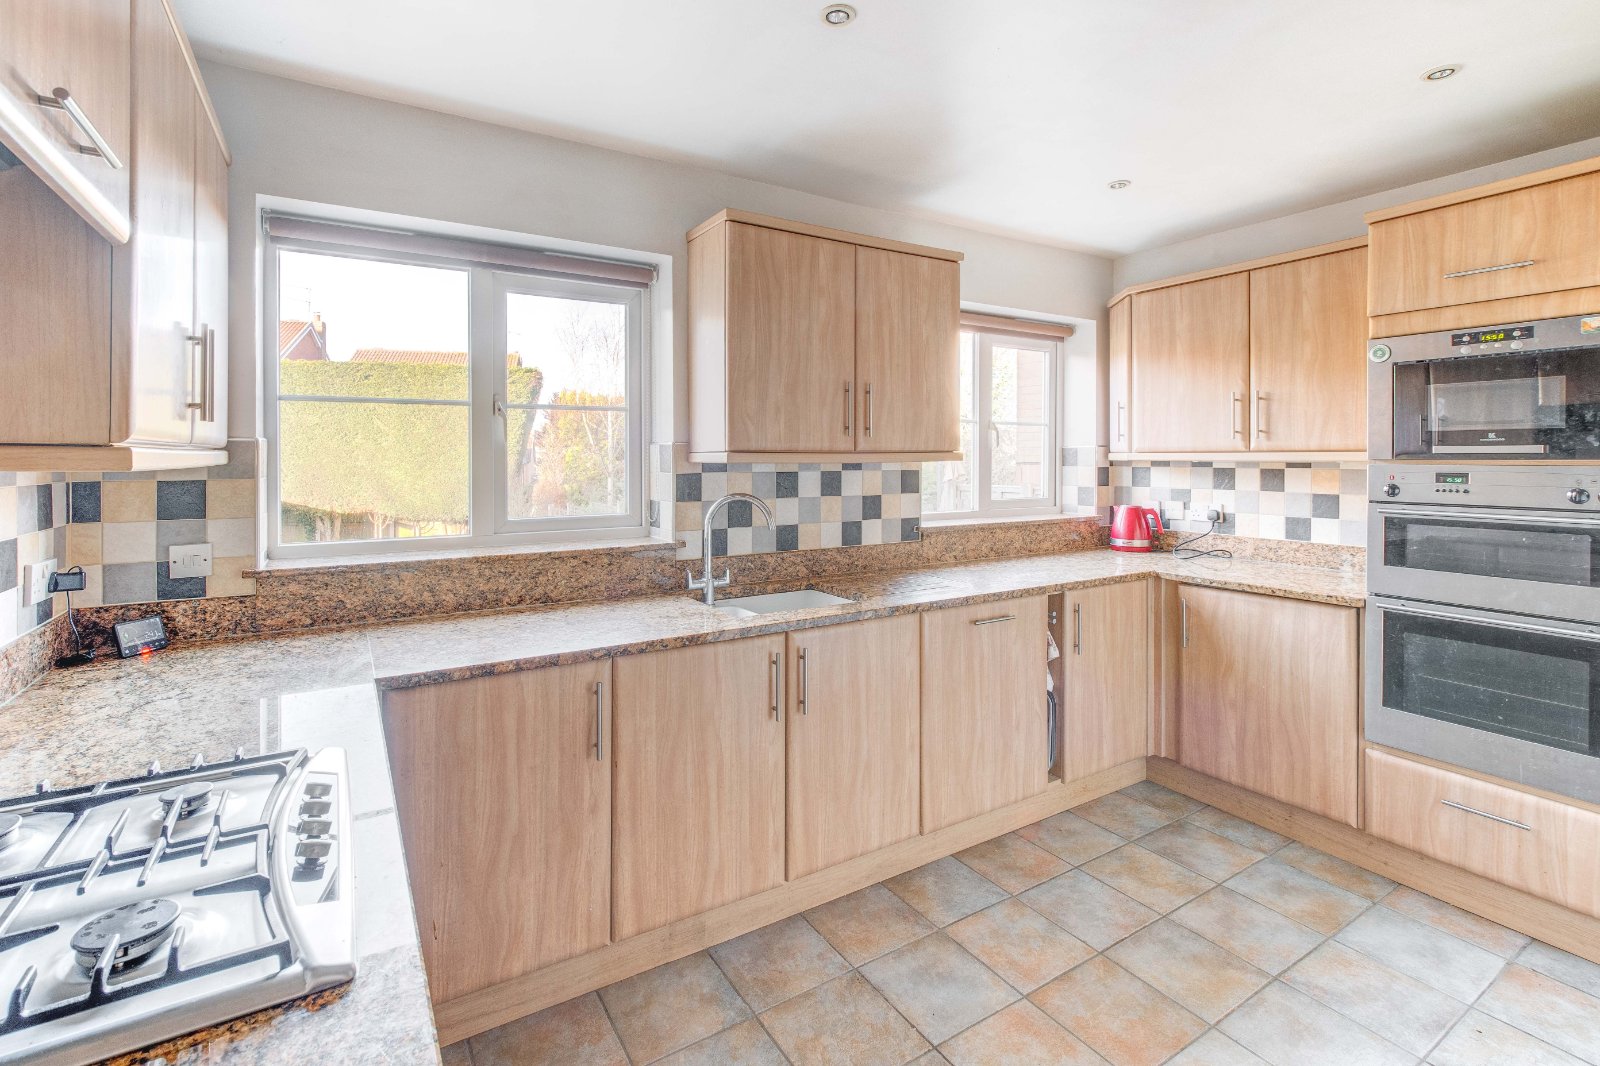 4 bed house for sale in Crownhill Meadow, Catshill 2